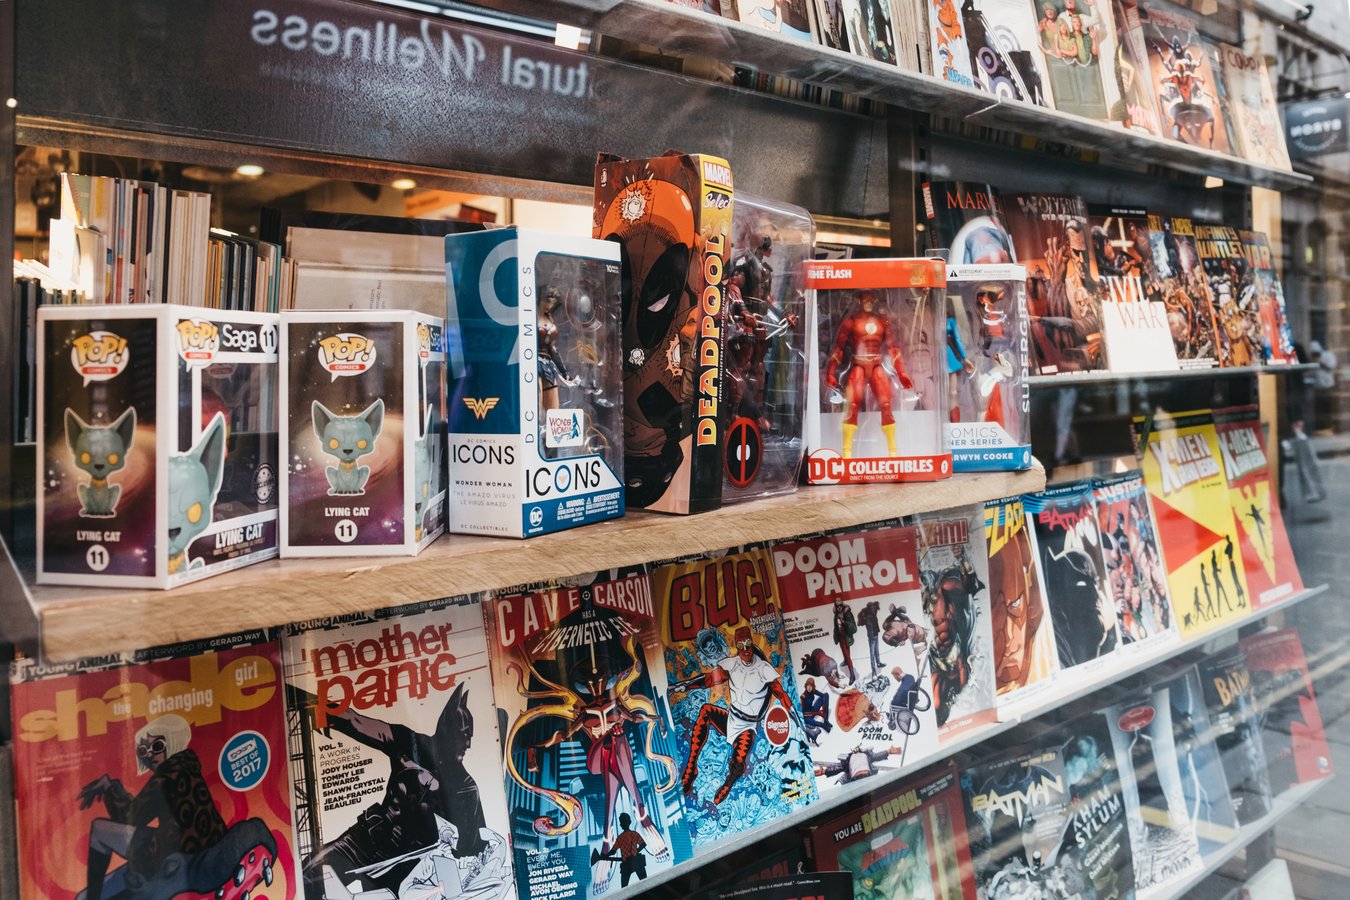 London, UK - December 18, 2018: Comic books on a window retail display of Gosh! Comics shop in Covent Garden a famous tourist area in London with lots of shops and restaurants.